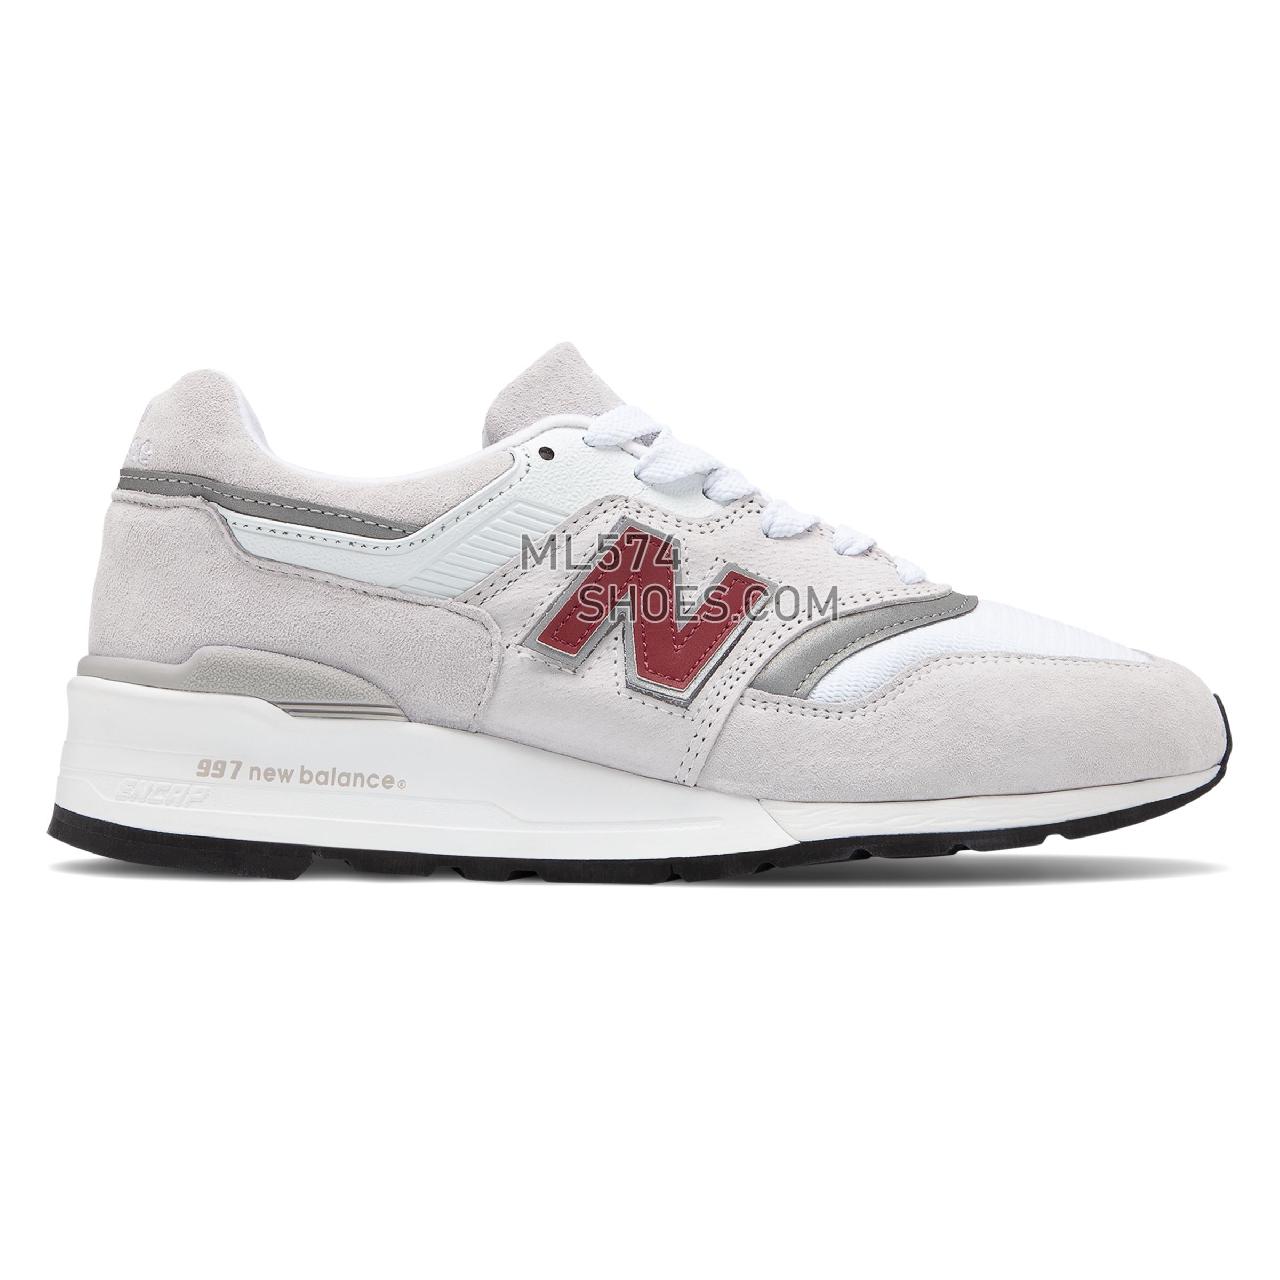 New Balance Made in US 997 - Men's Made in US 997 - White with Silver - M997LBG